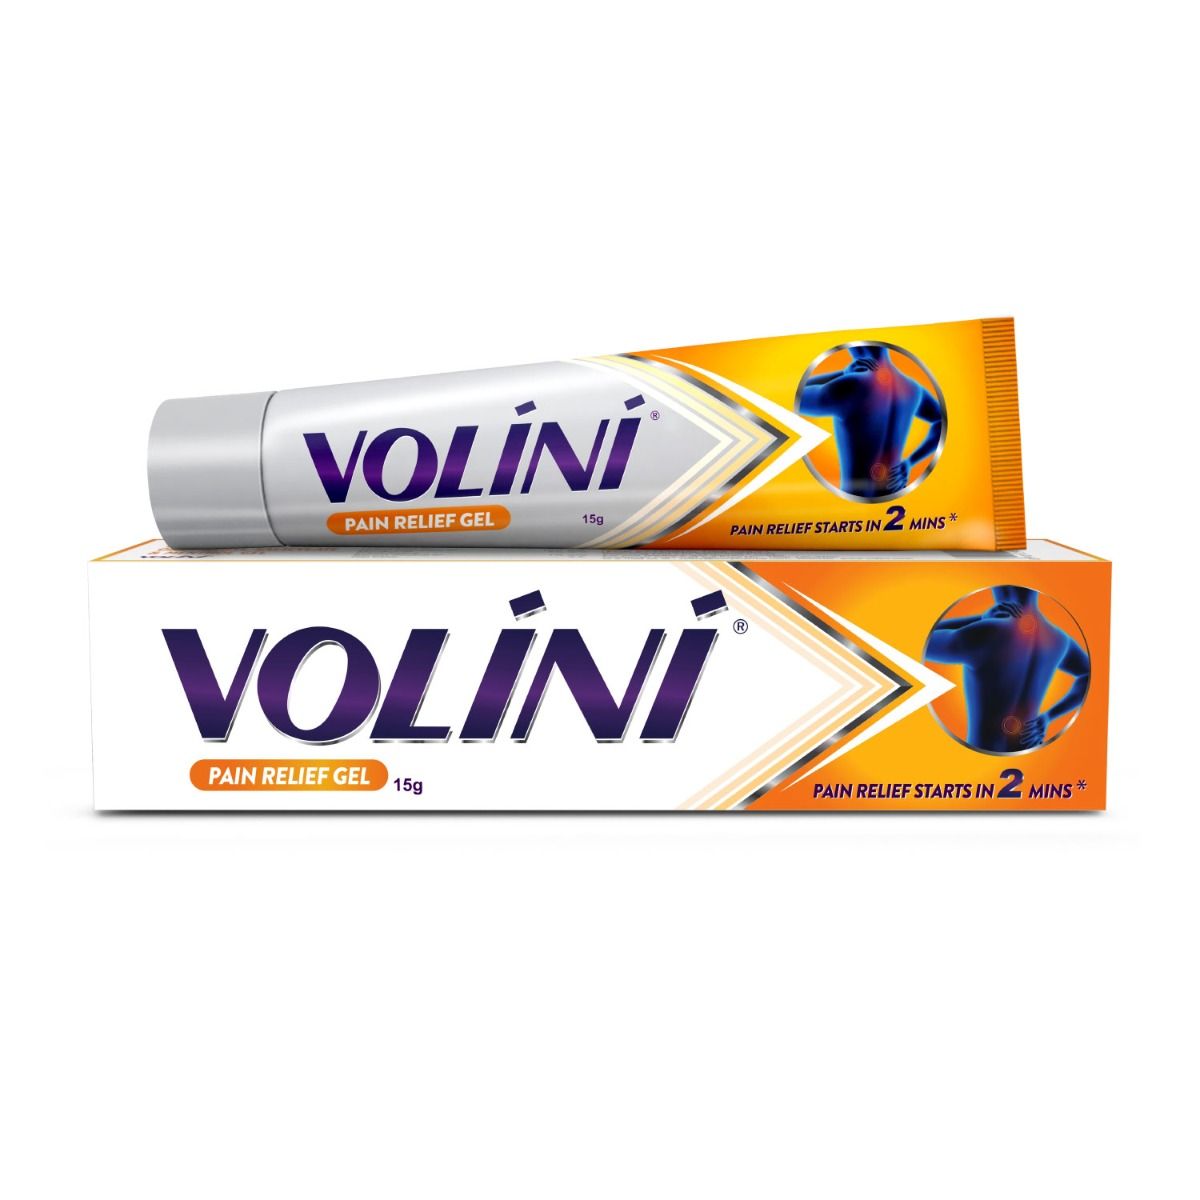 Volini Pain Relief Gel, 15 gm Price, Uses, Side Effects ...